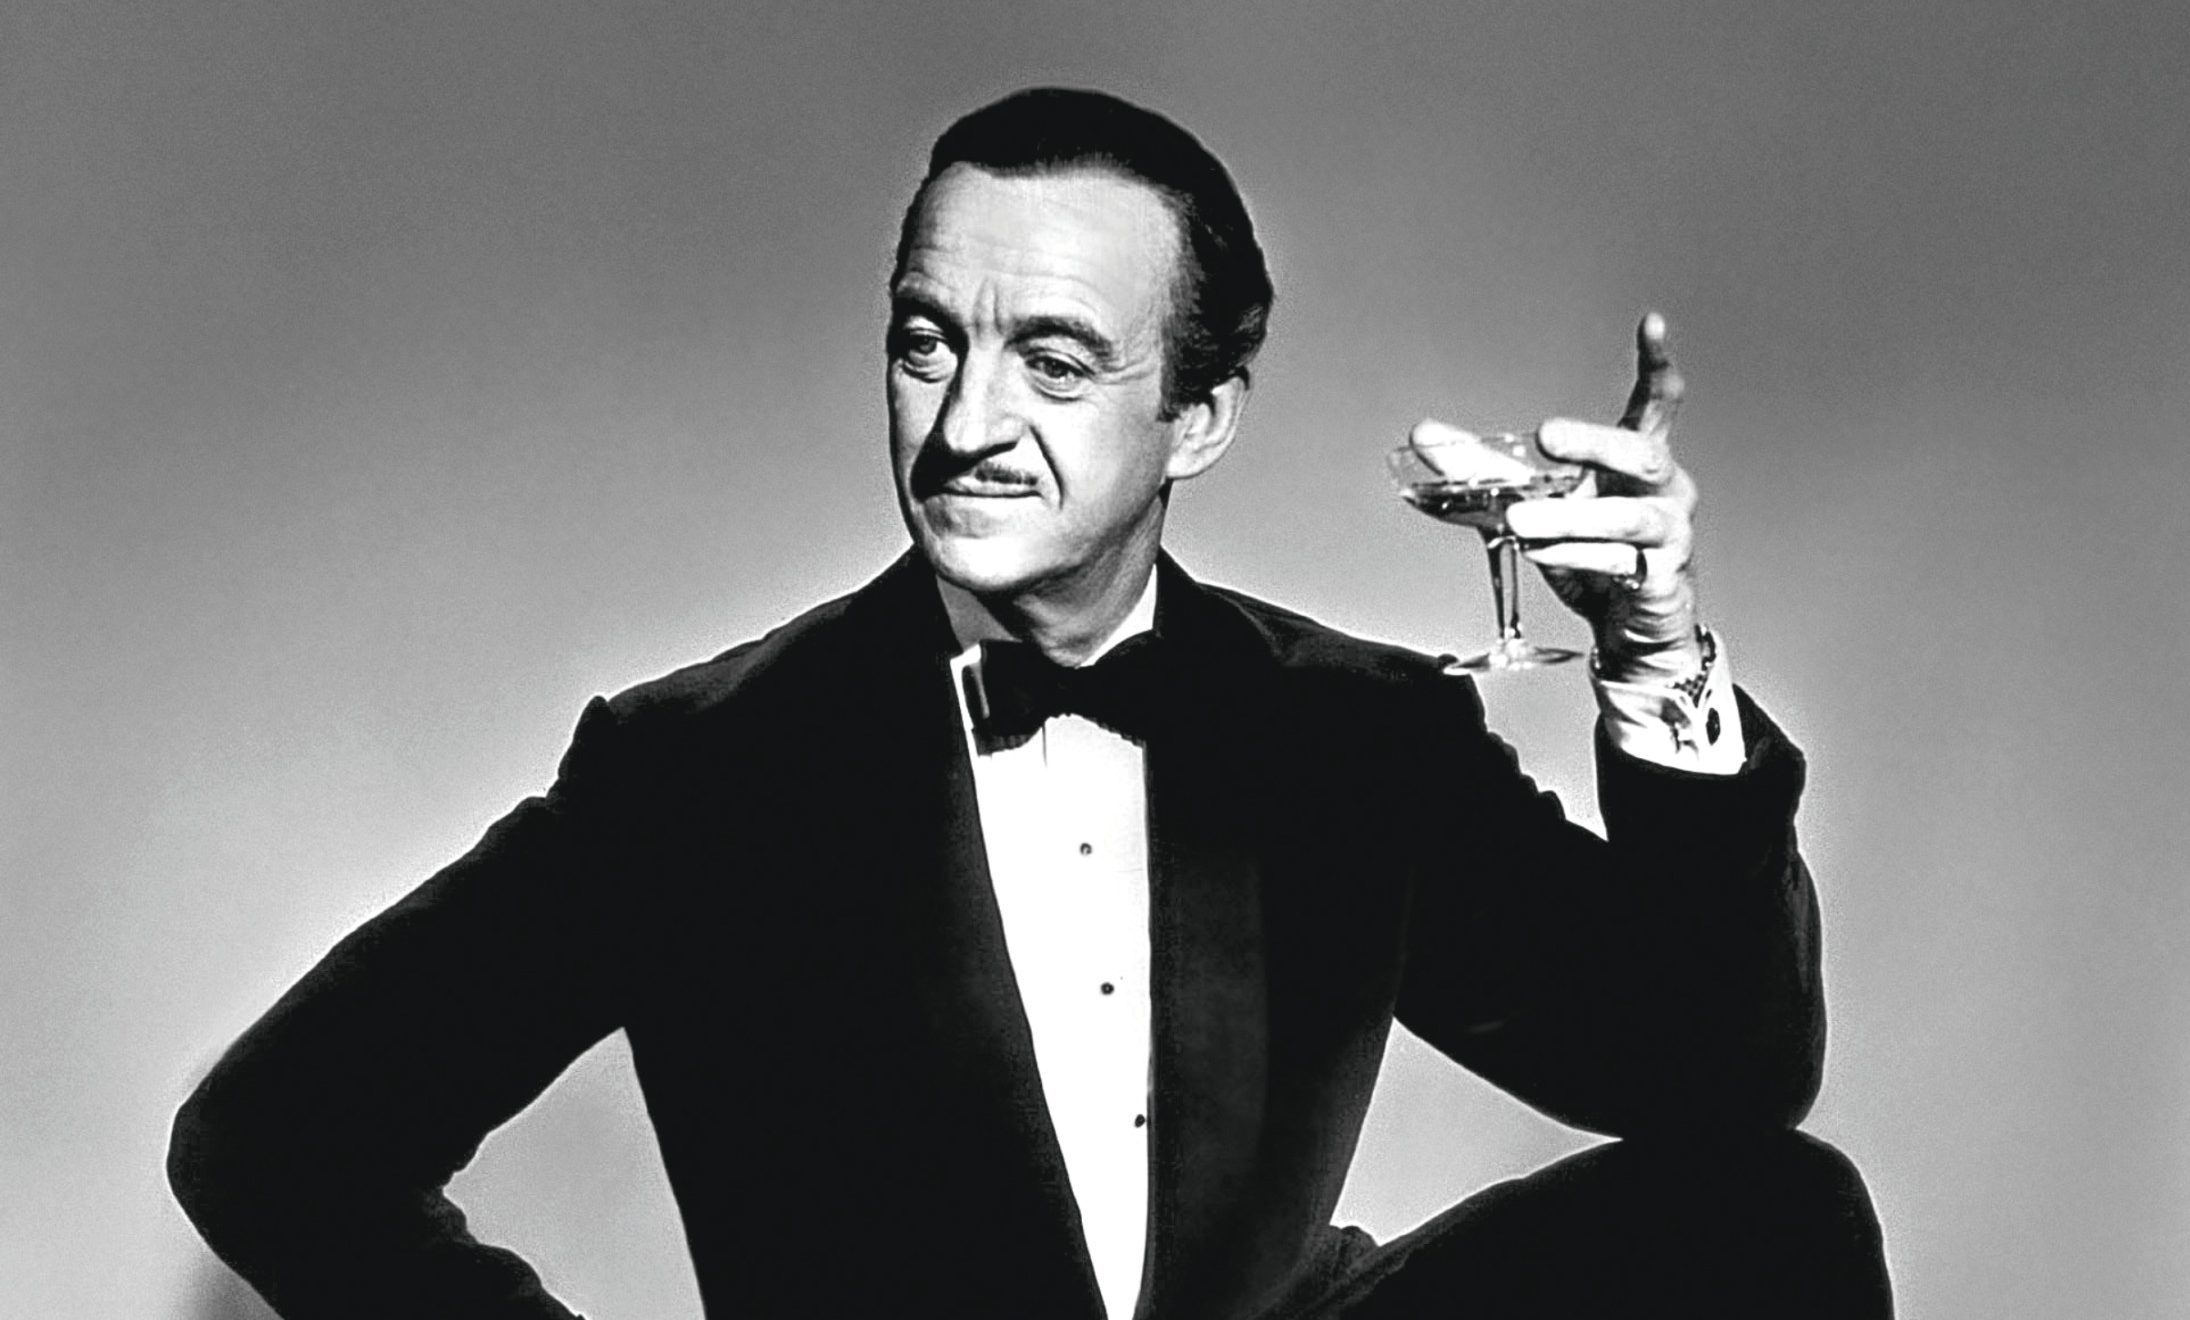 David Niven in The Pink Panther, 1963 (Allstar/UNITED ARTISTS)